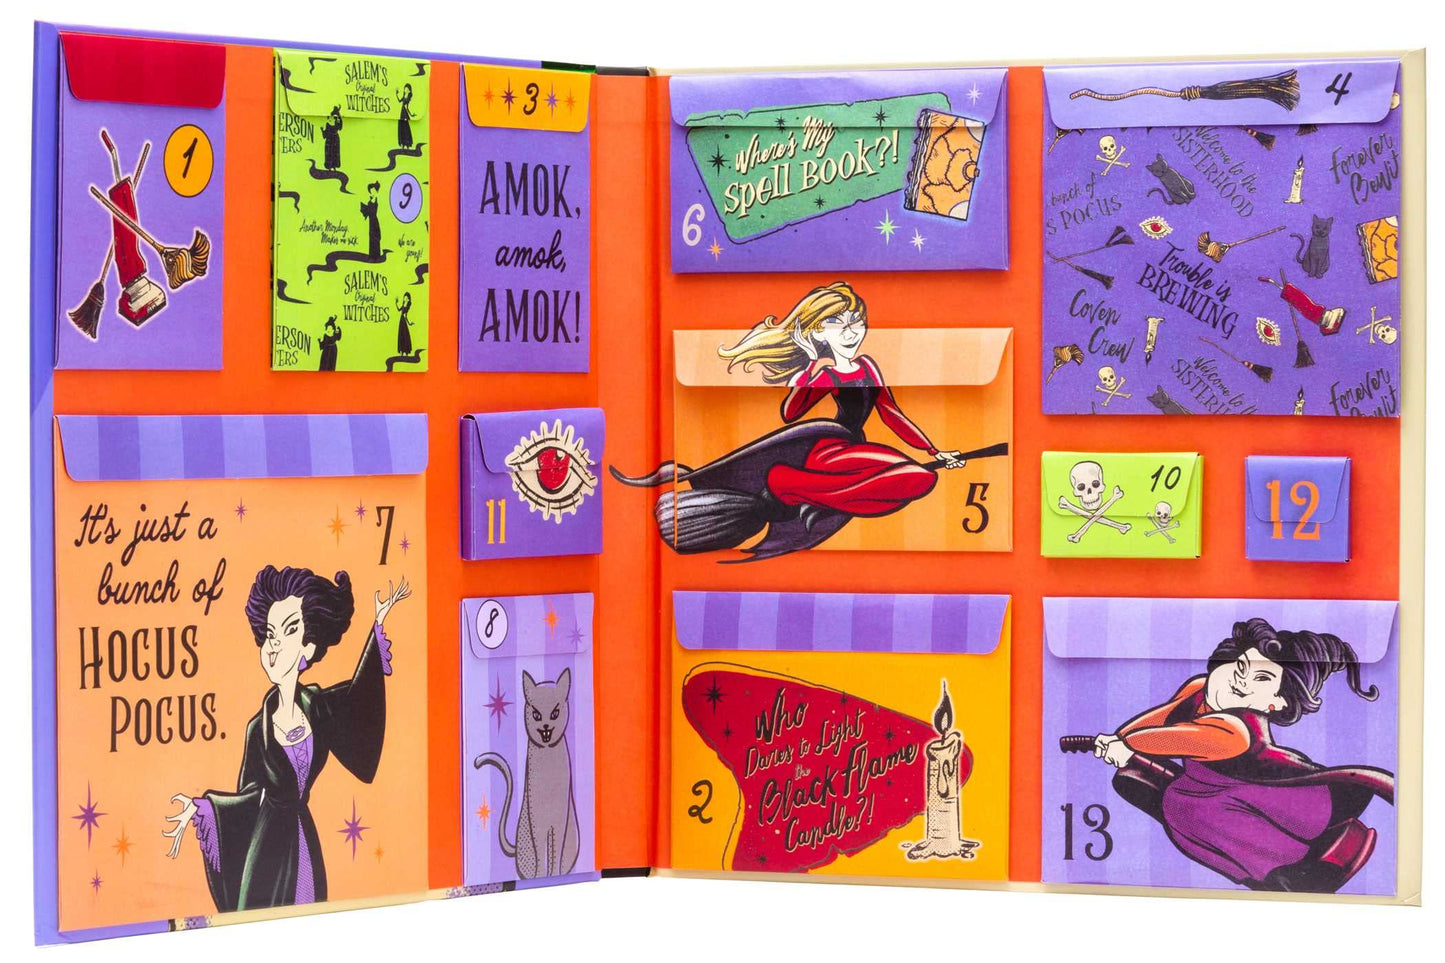 Hocus Pocus: 13 Frights of Halloween - The Mouse Merch Box